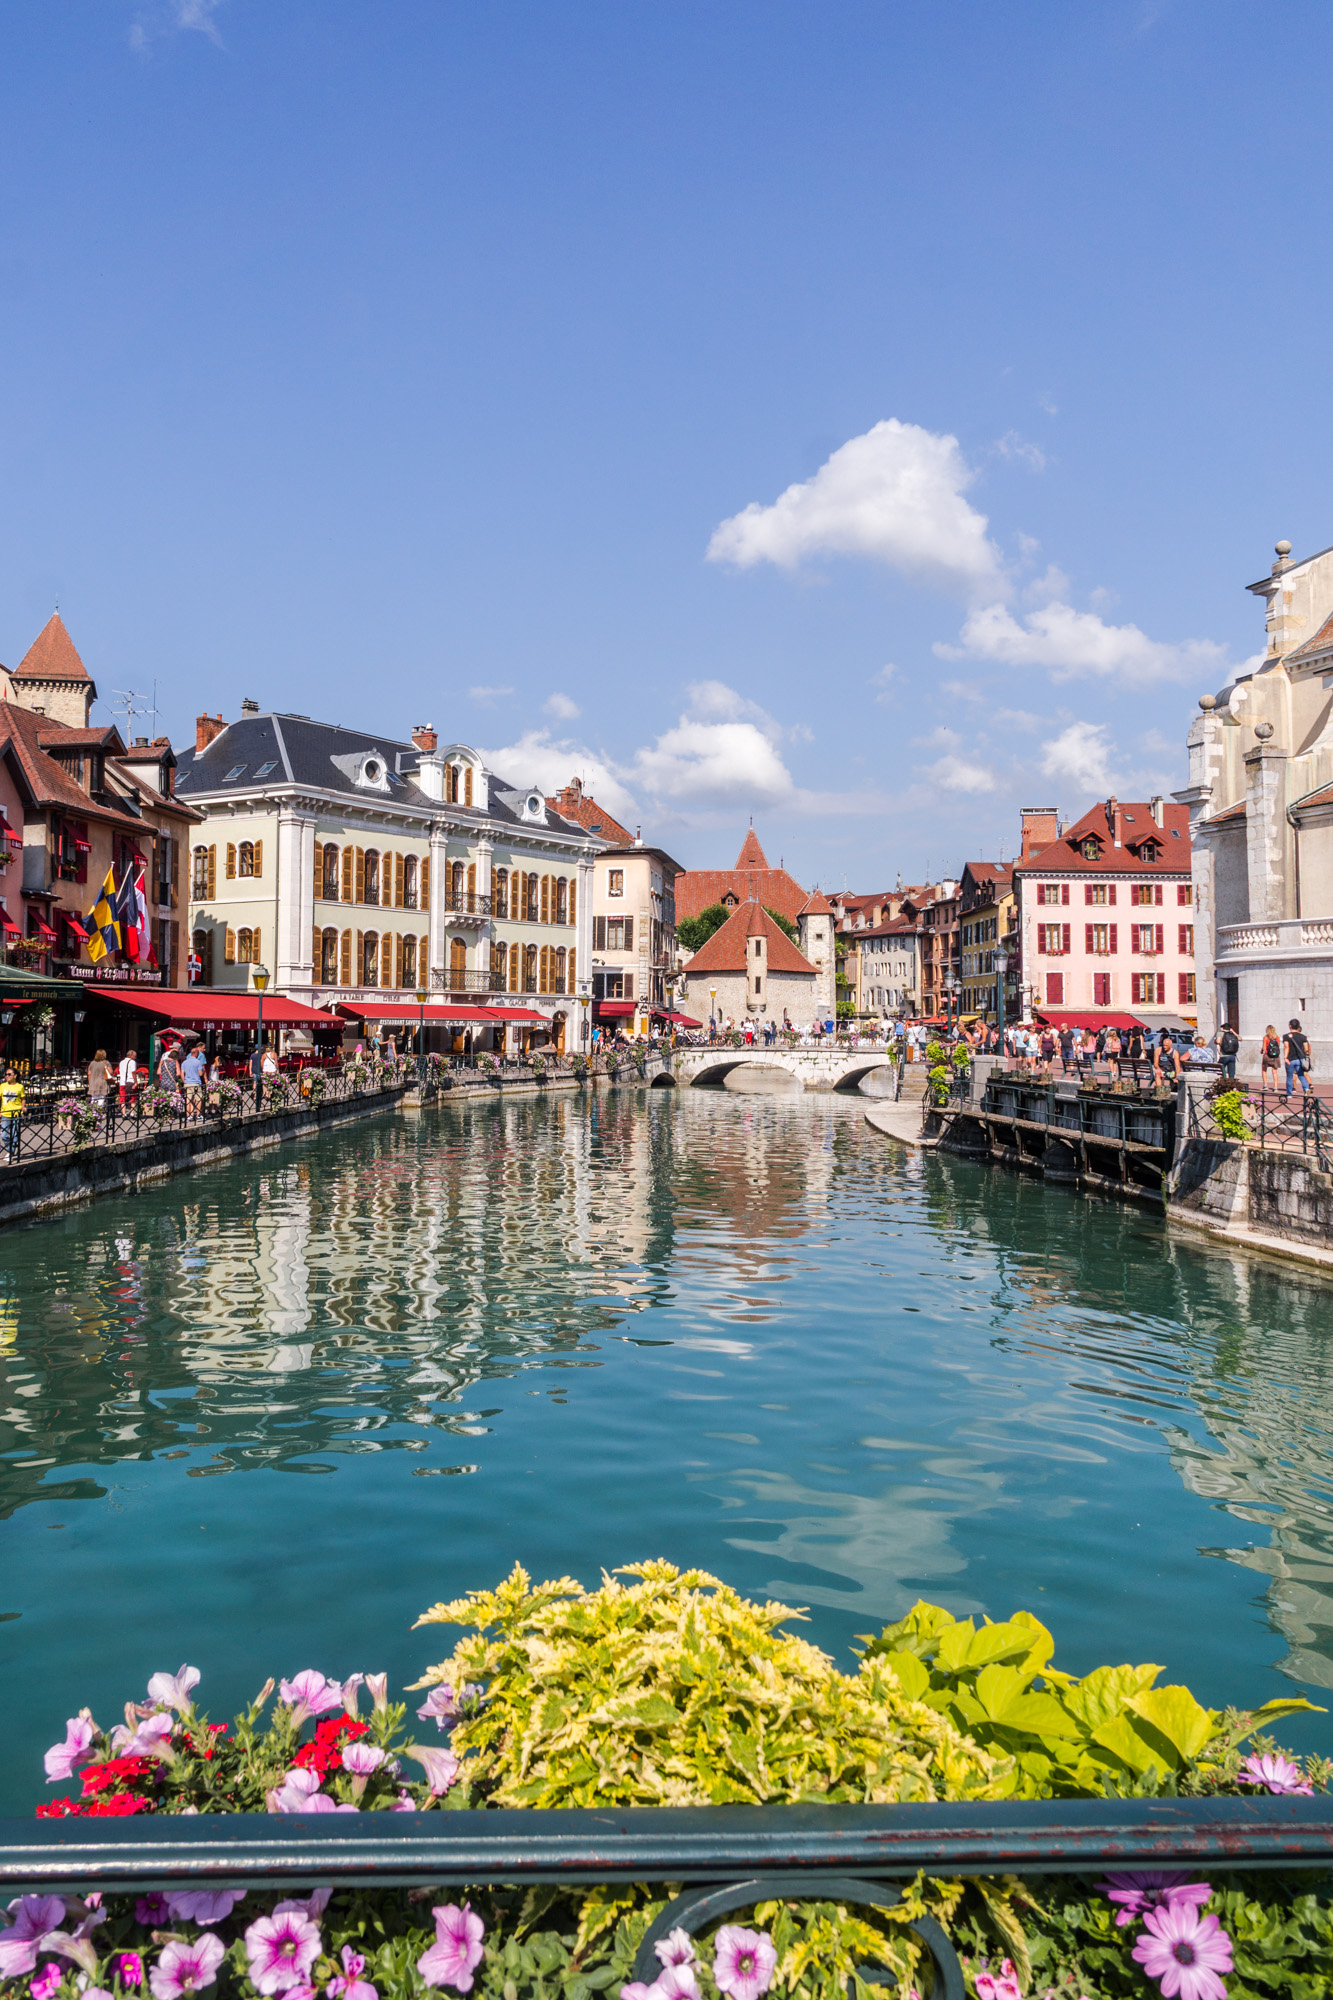 France/Italy roadtrip – Annecy